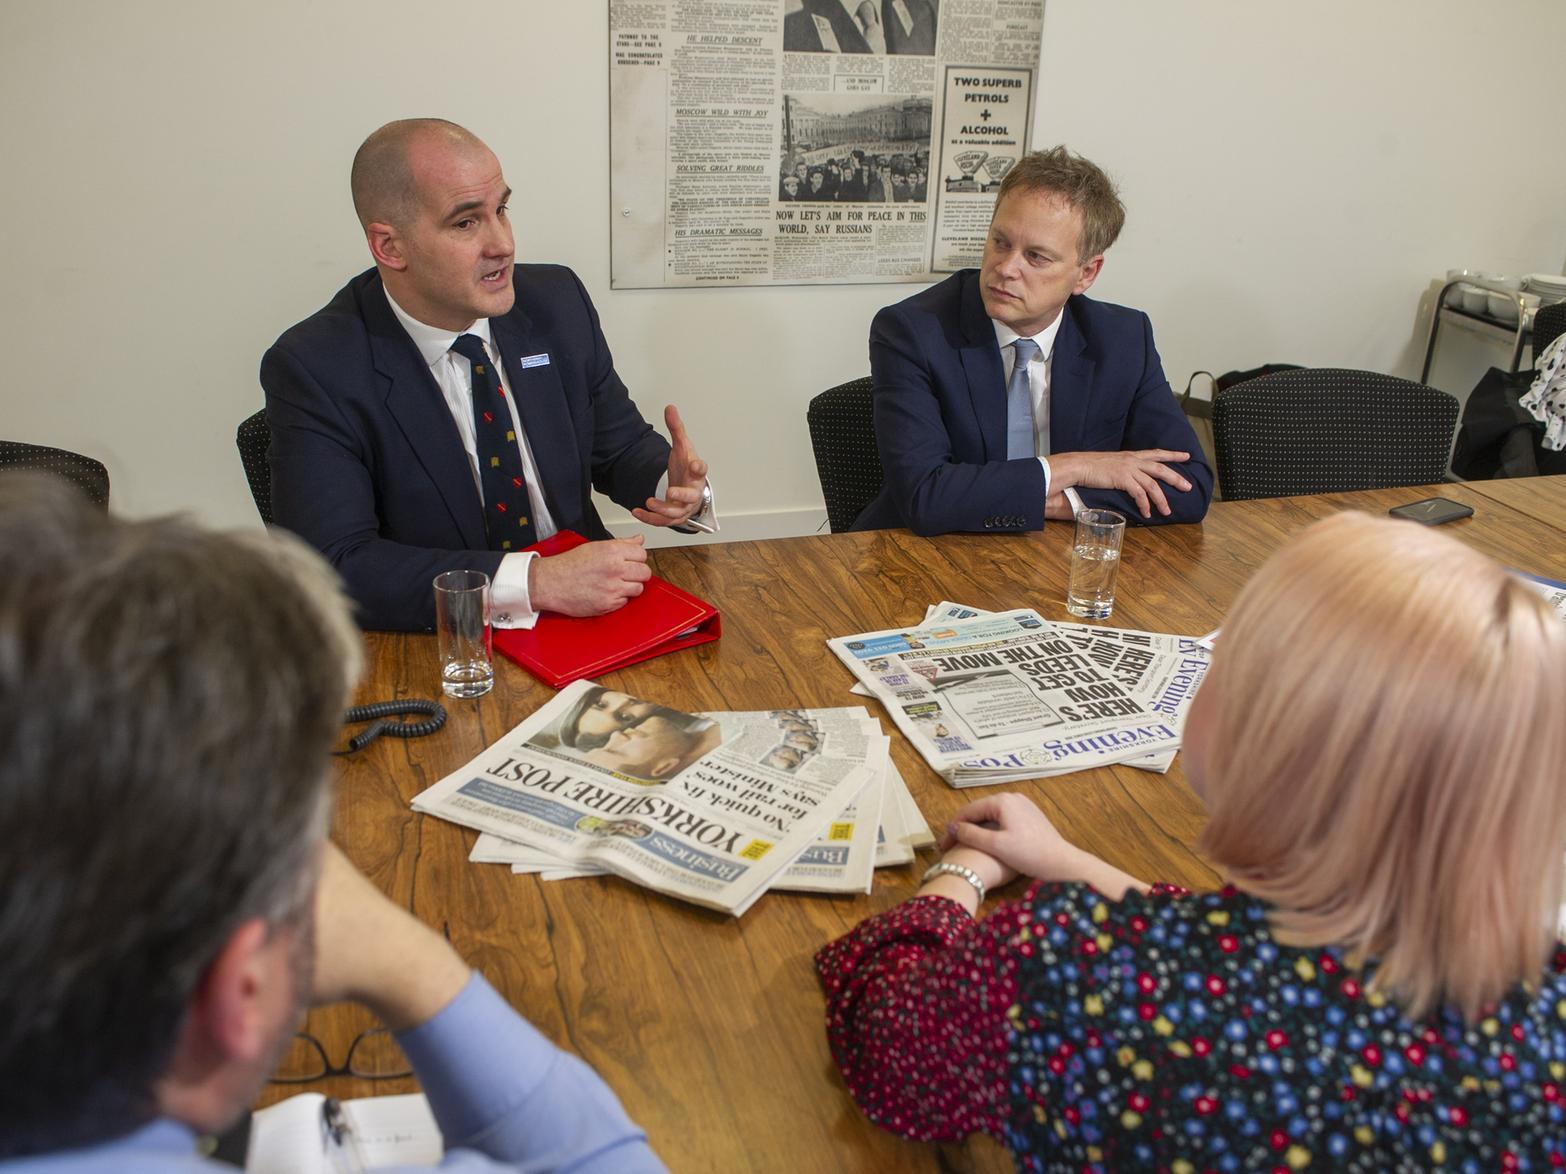 Grant Shapps and Jake Berry at the YEP's office